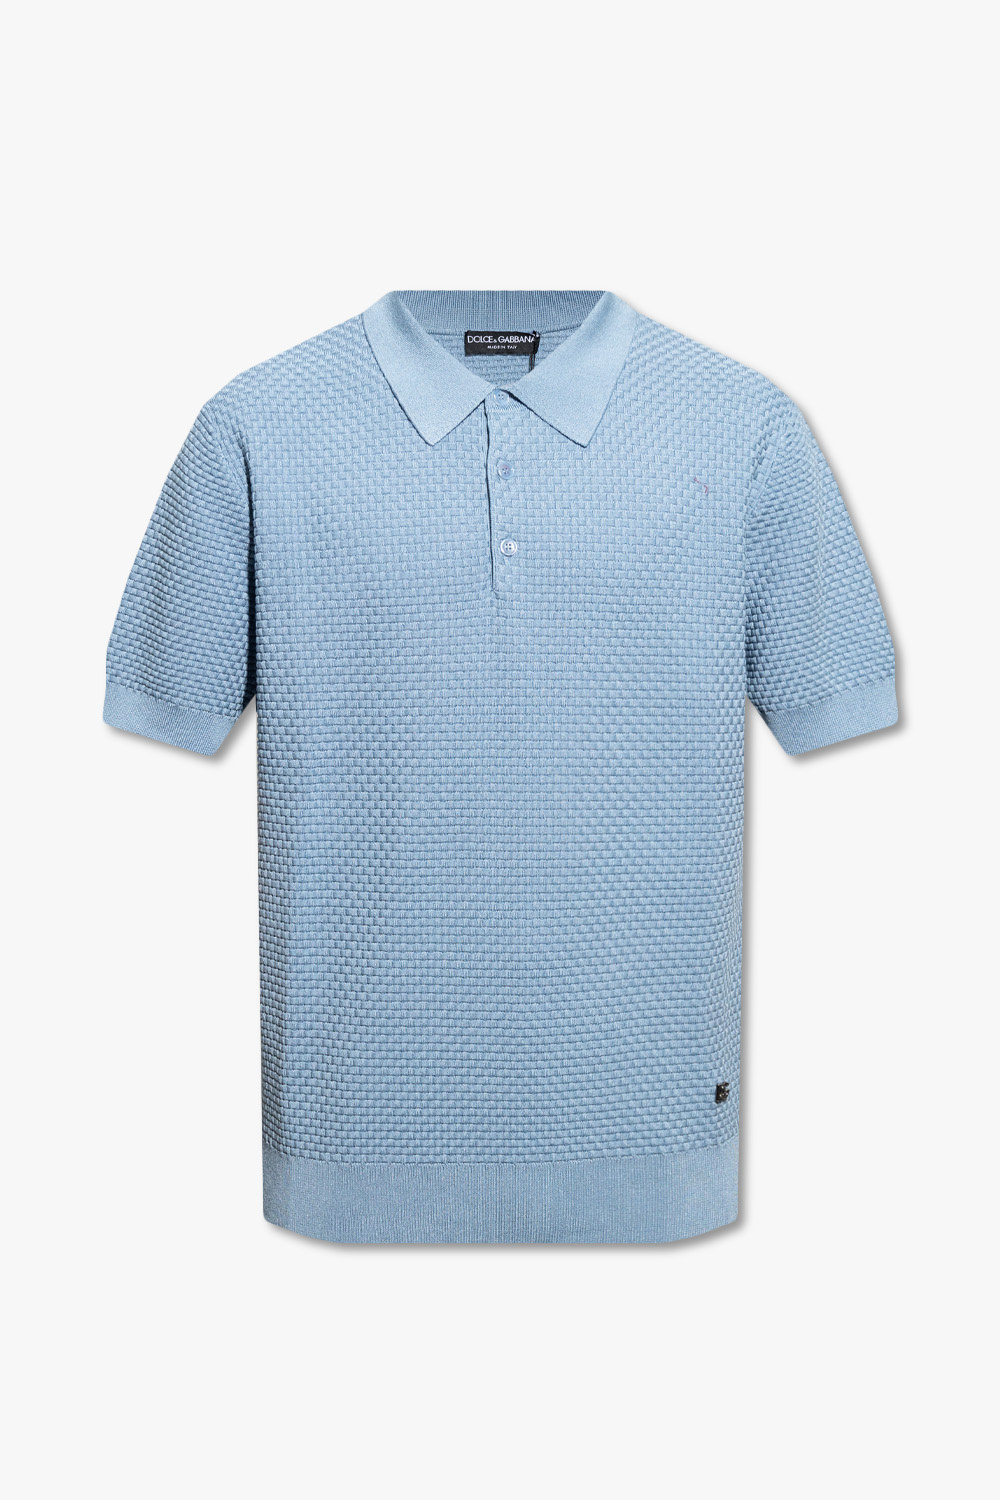 Dolce & Gabbana Polo shirt with short sleeves